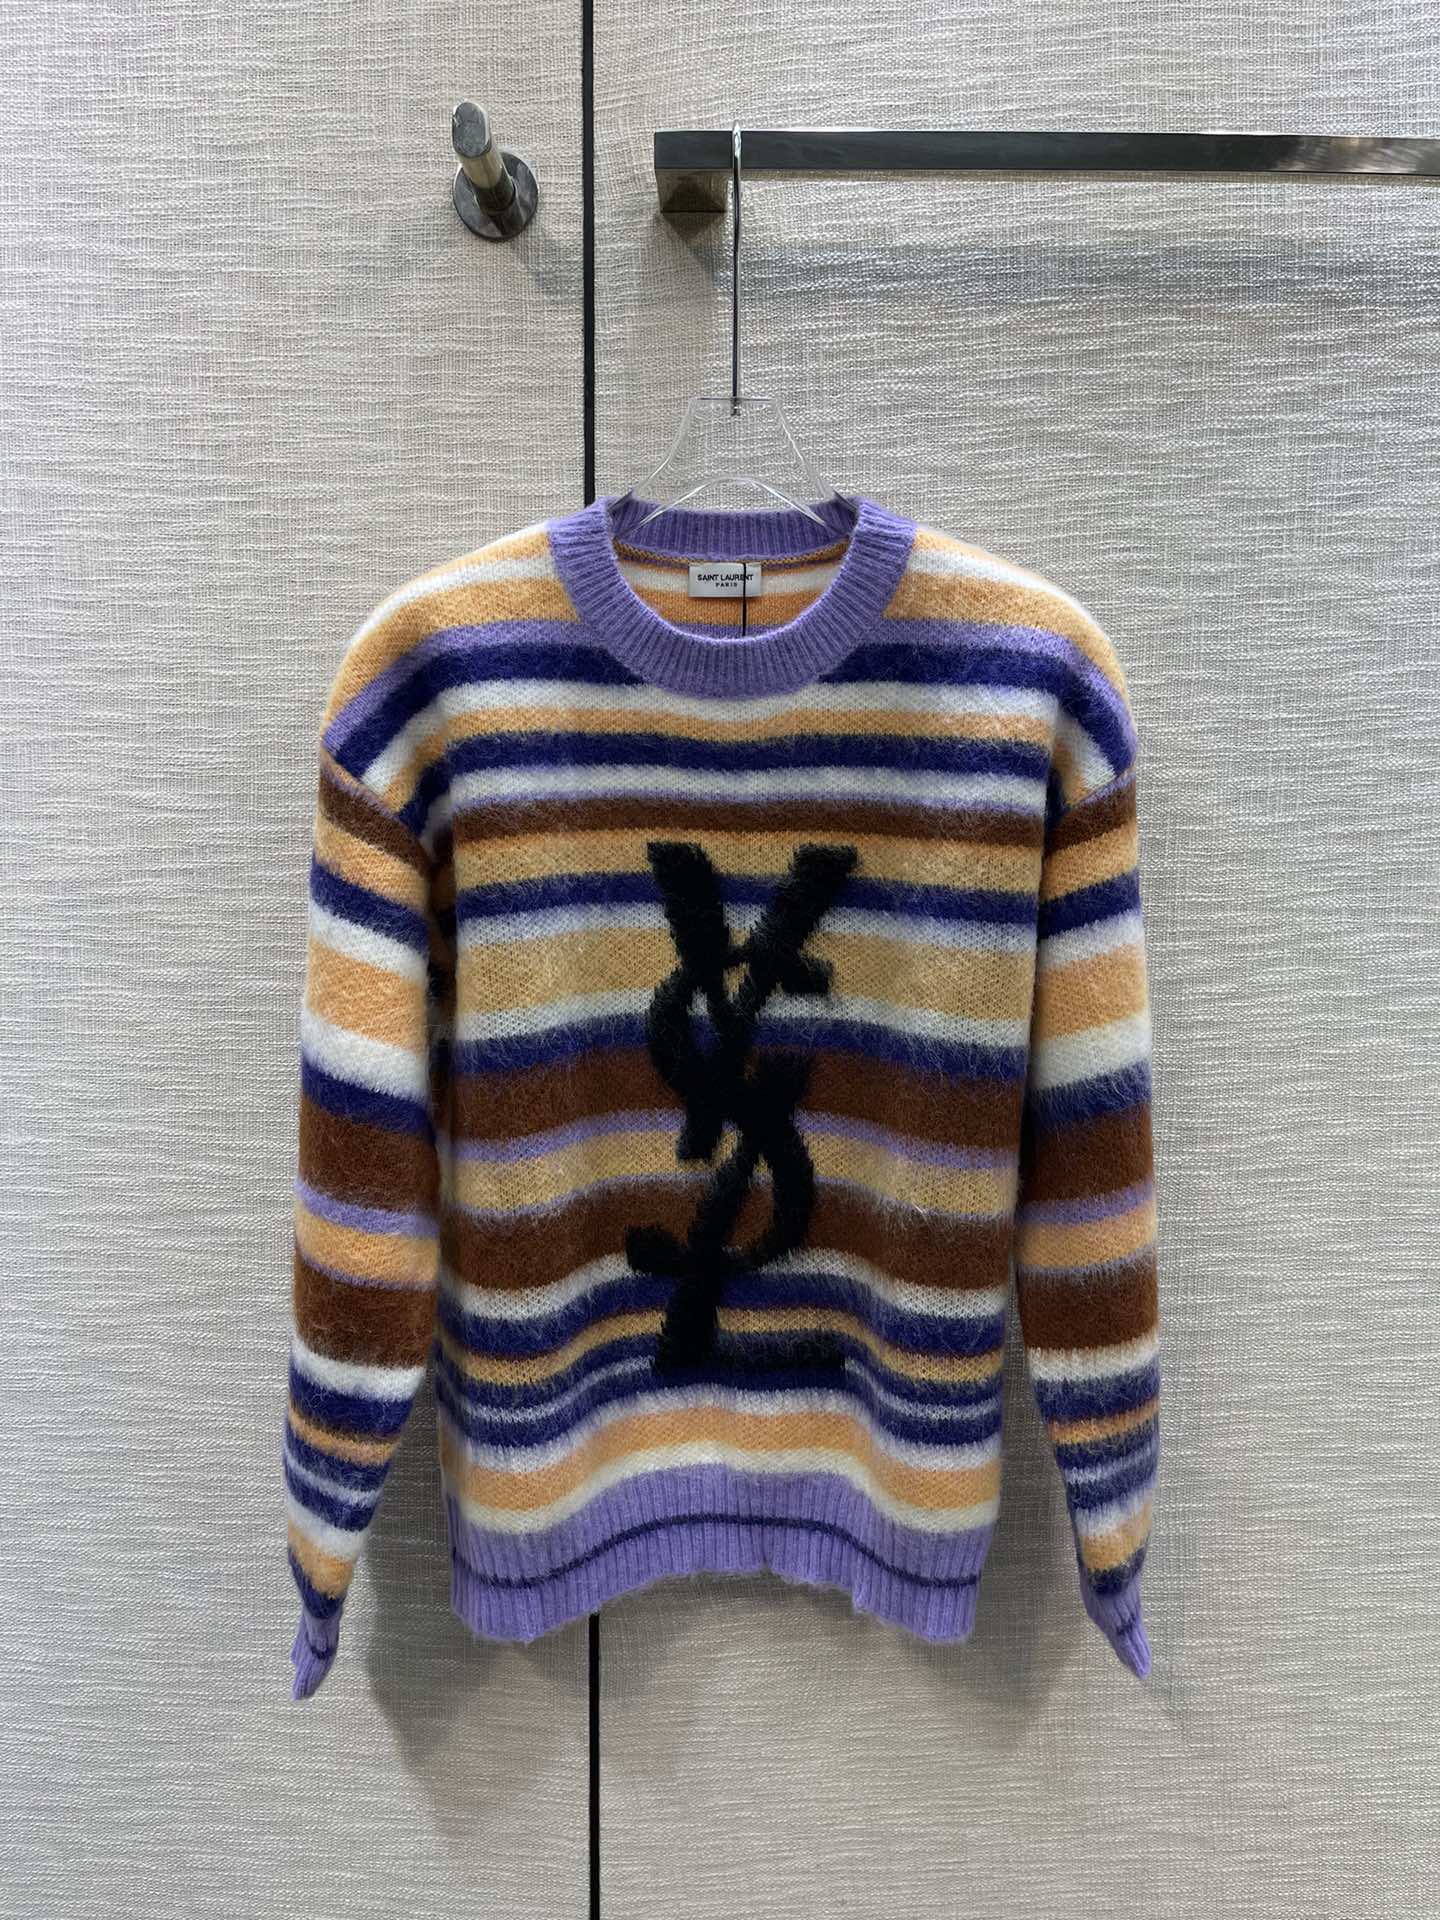 Yves Saint Laurent Clothing Sweatshirts Knitting Spring Collection Vintage Long Sleeve